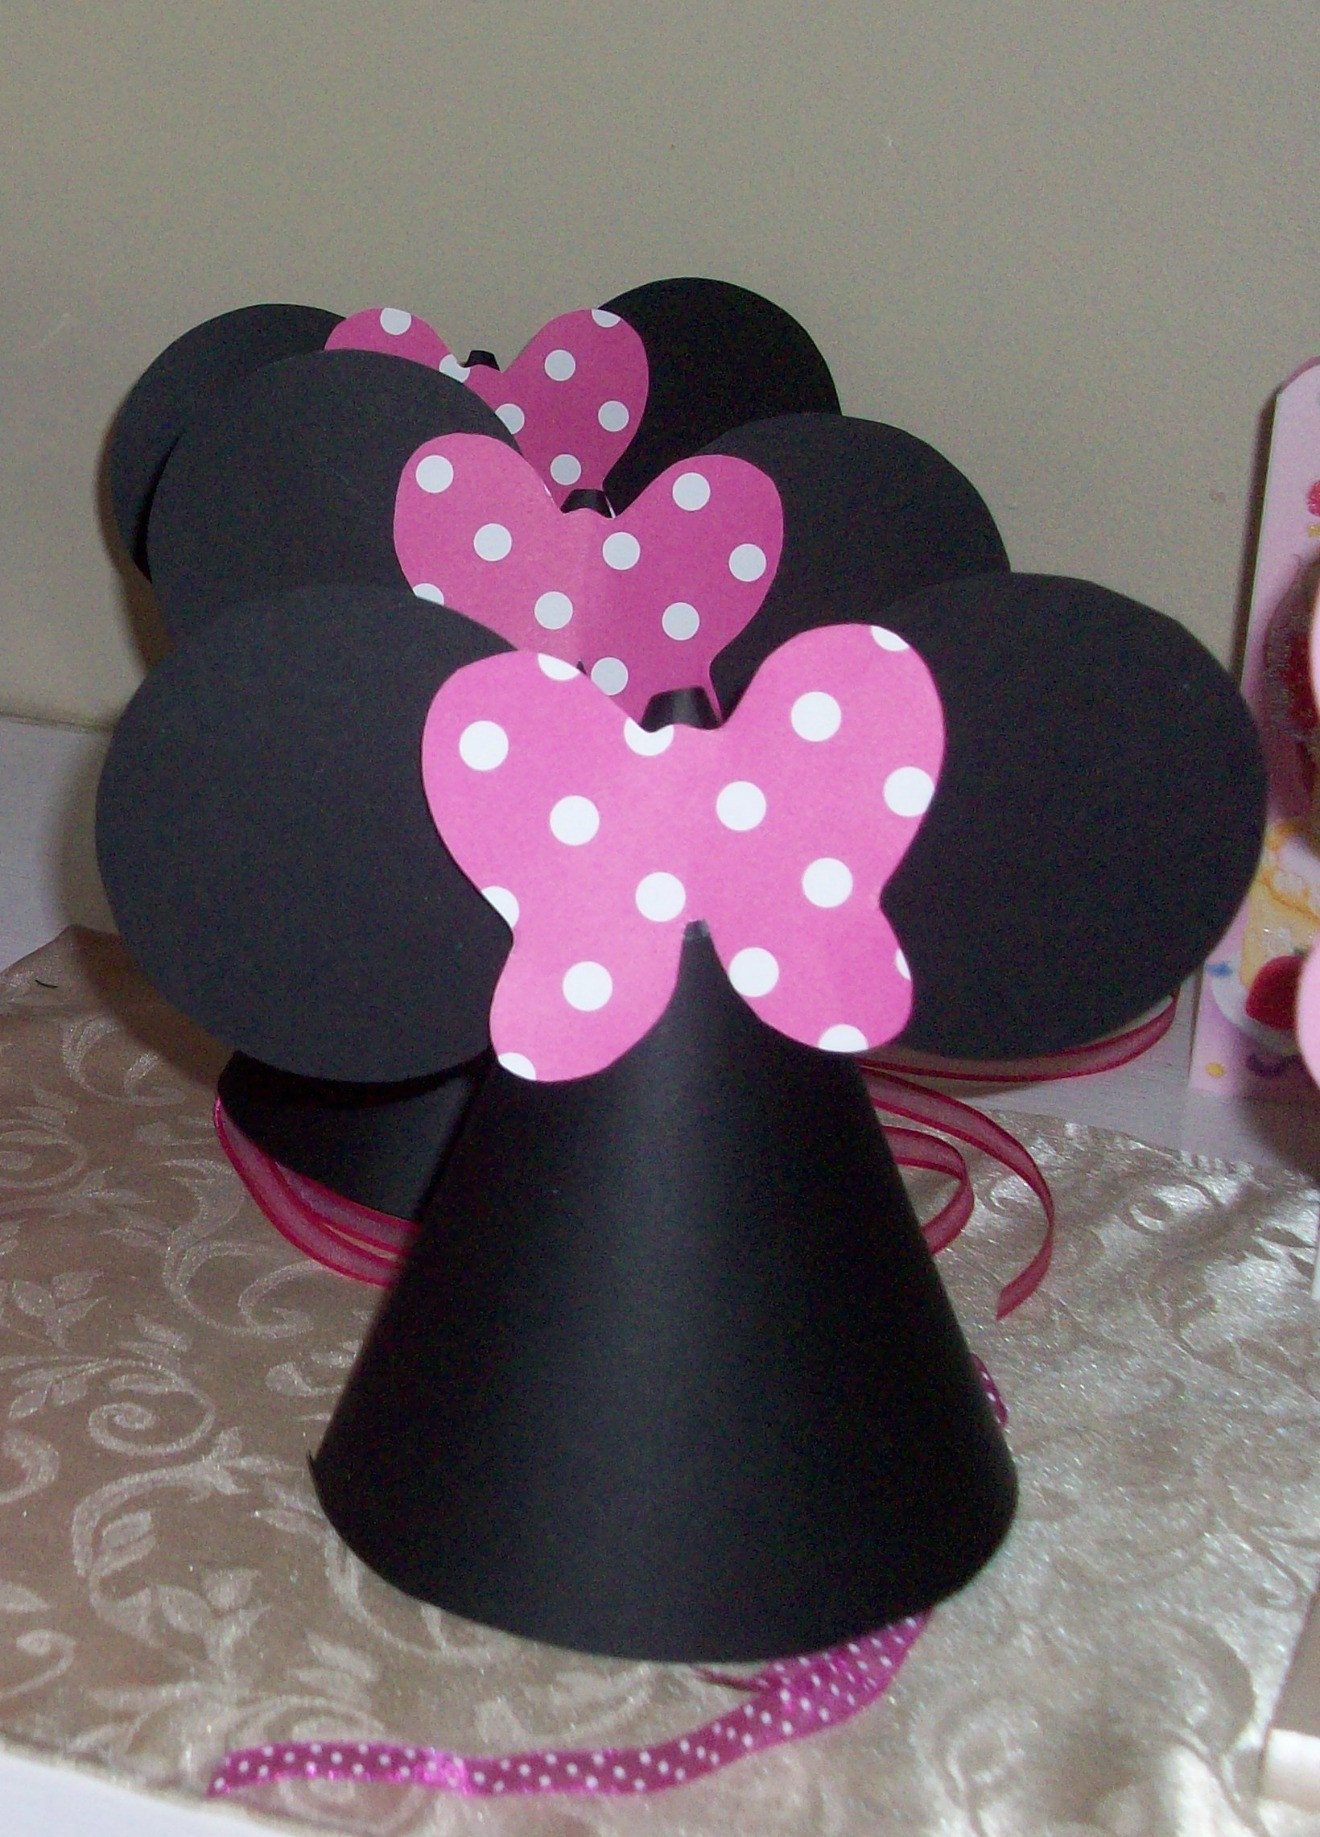 DIY Minnie Mouse Party Decorations
 DIY Tutorial from A Catch My Party Member How to Make